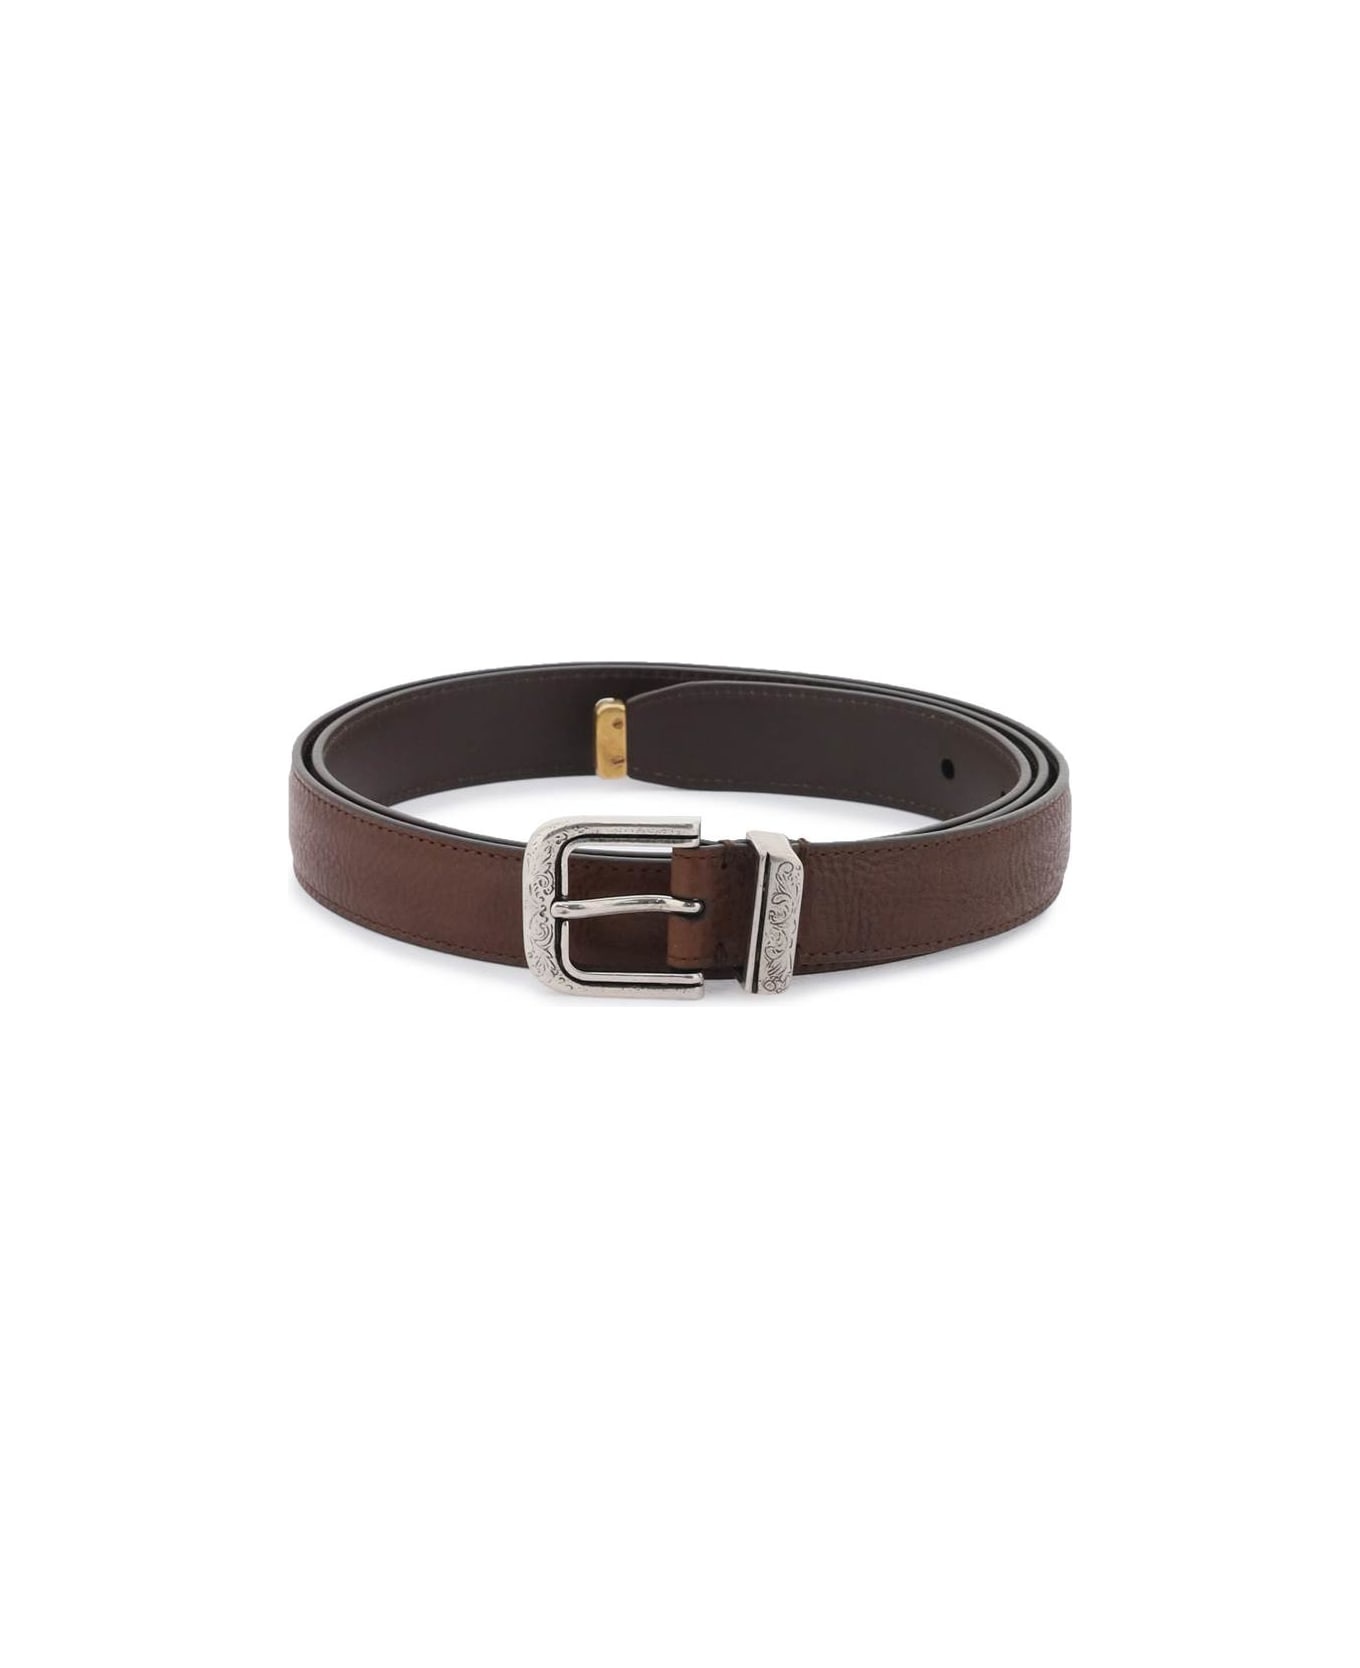 Leather Belt With Detailed Buckle - 1